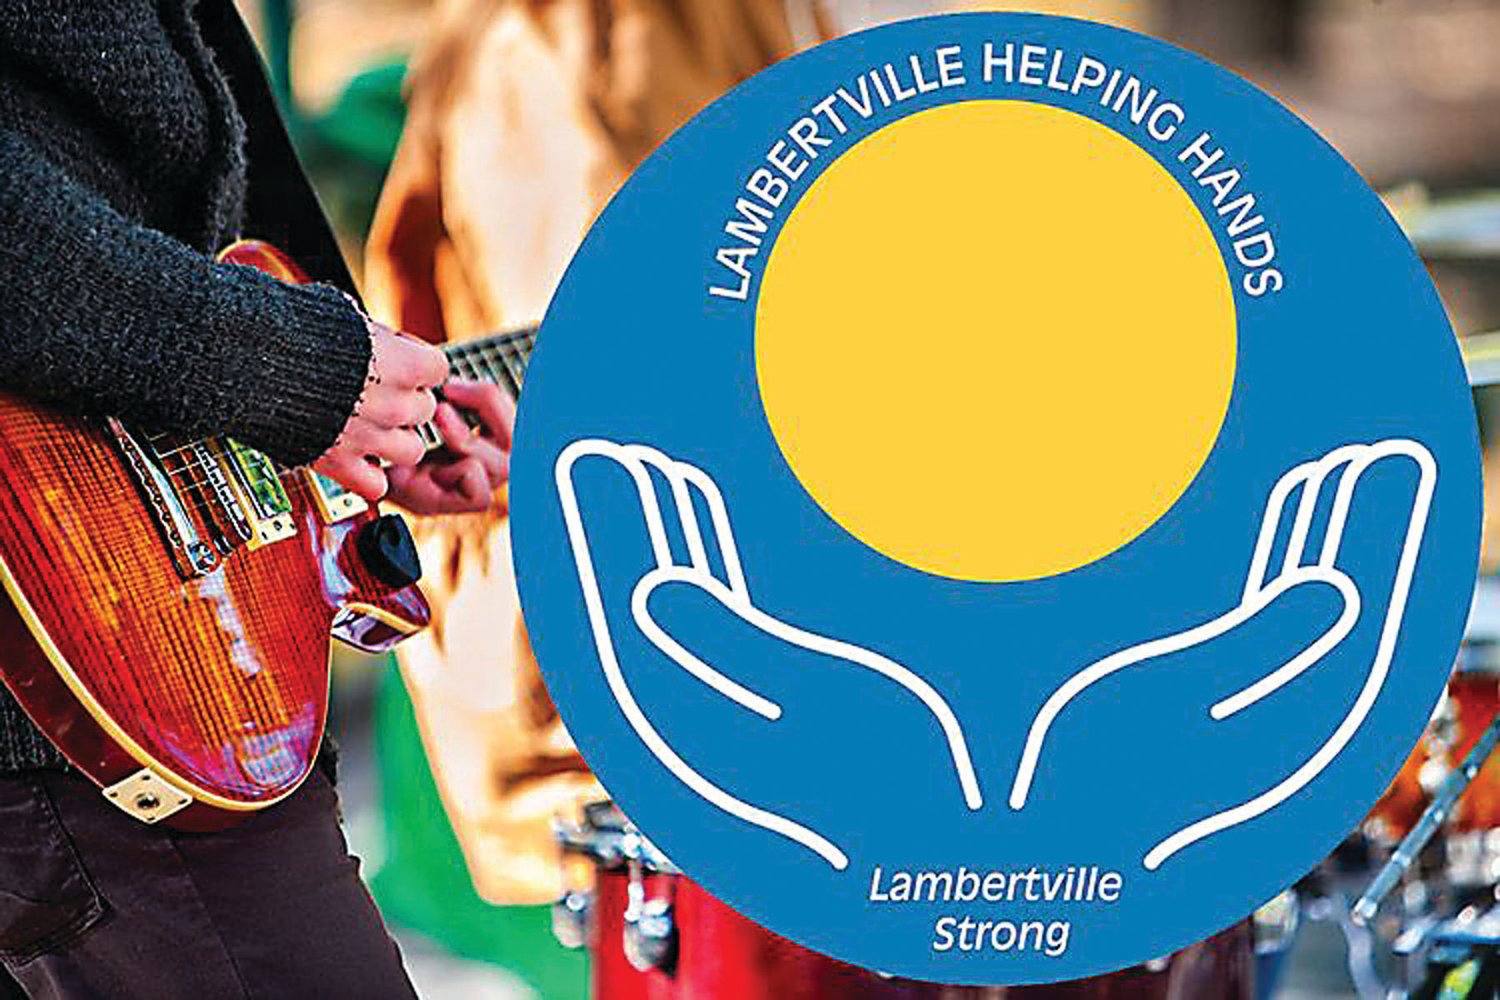 Capitol Health and The Lambertville Chamber of Commerce present the Lambertville Helping Hands Benefit Concert Oct. 9 and 10, to aid those whose homes and businesses were damaged by the remnants of Hurricane Ida.